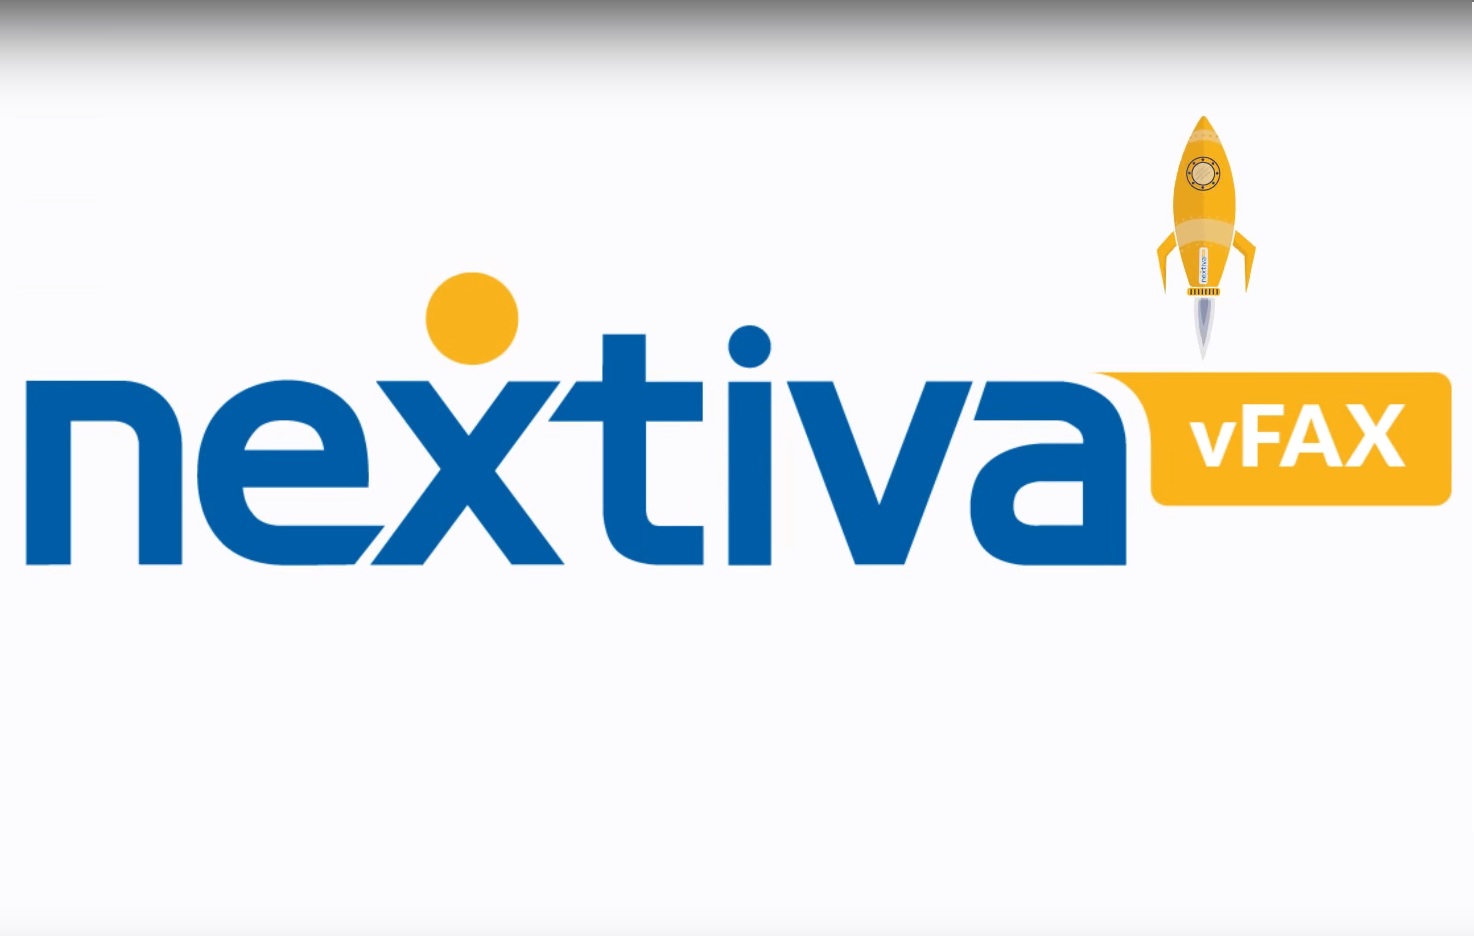 What are the benefits of Nextiva vFax?